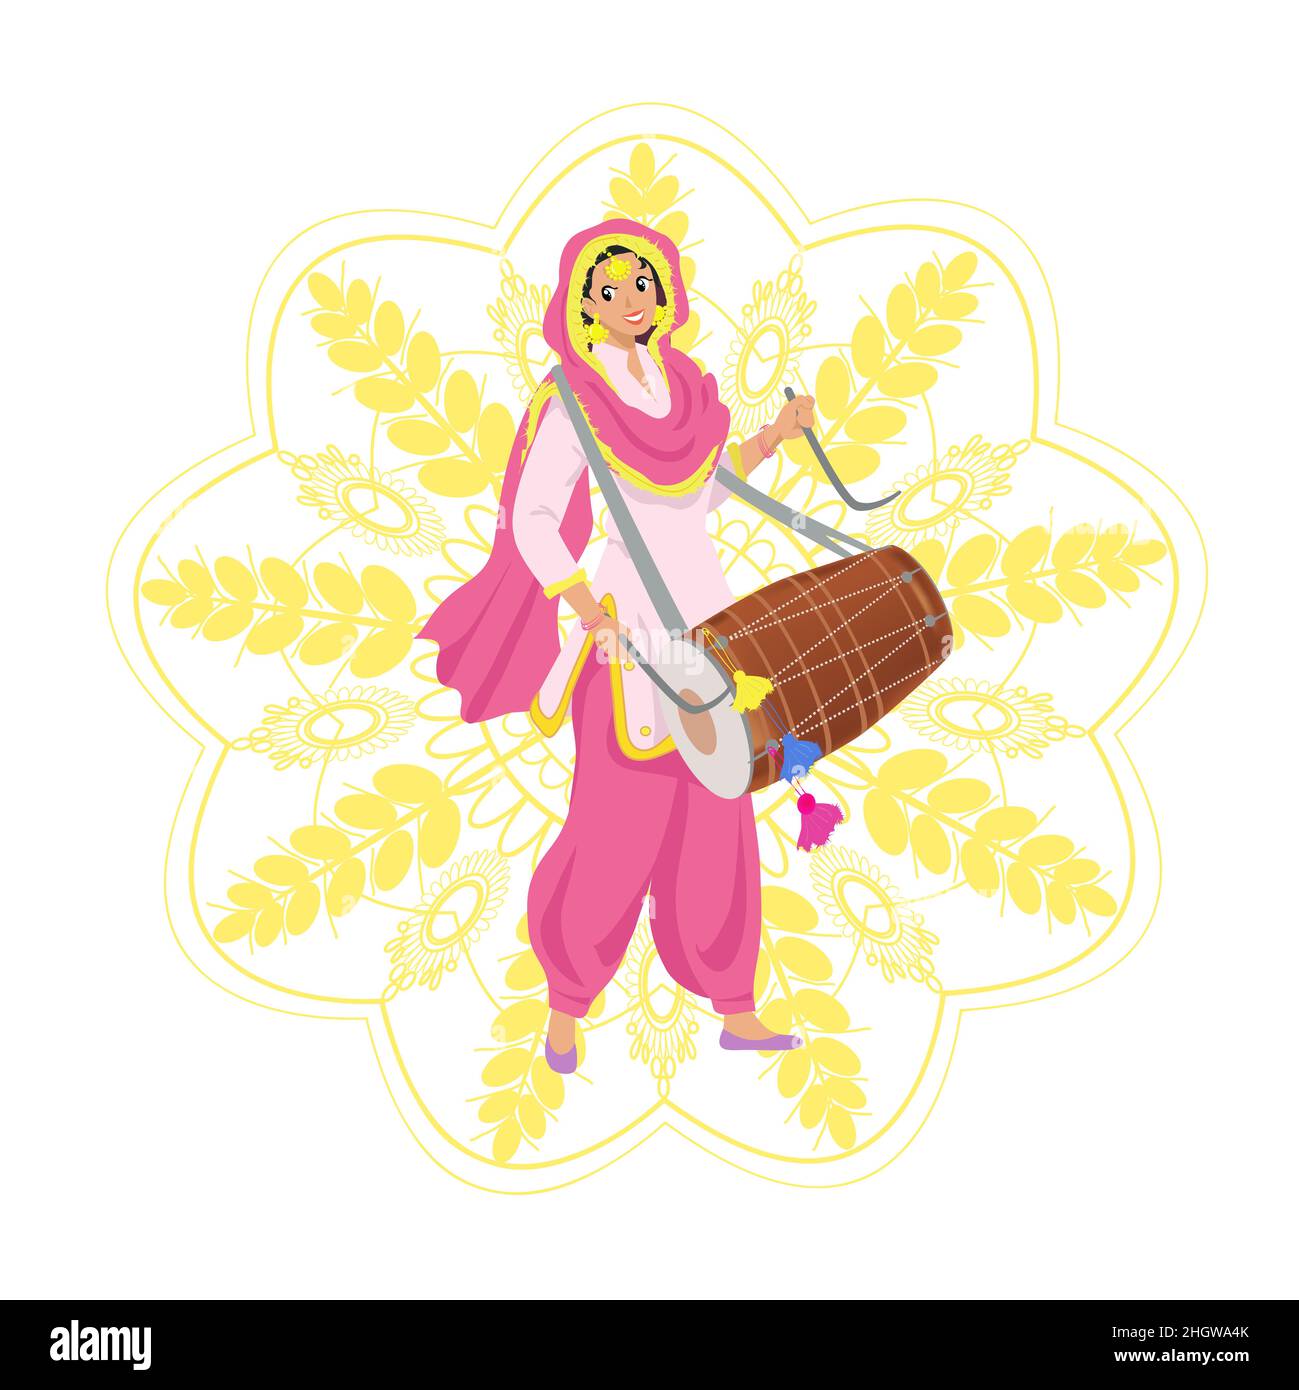 Happy smiling young Sikh woman in Punjabi pink salwar kameez suit, dupatta shawl, playing traditional dhol drum on Indian harvest festival Lohri, part Stock Vector